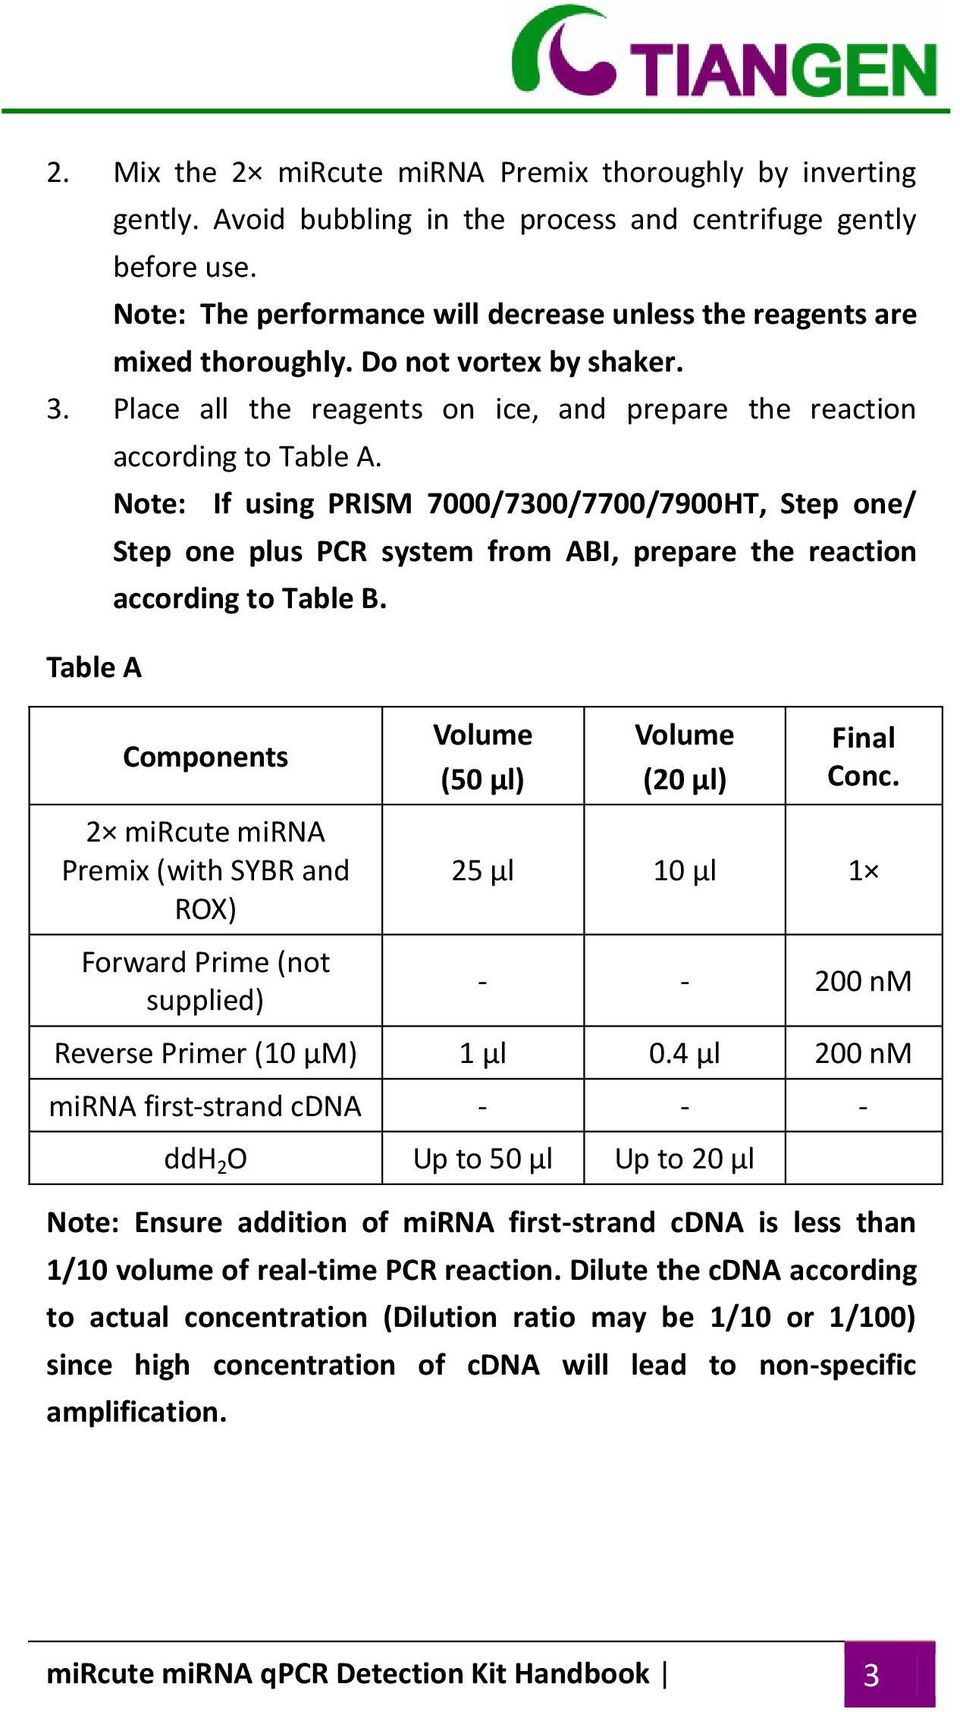 Note: If using PRISM 7000/7300/7700/7900HT, Step one/ Step one plus PCR system from ABI, prepare the reaction according to Table B.